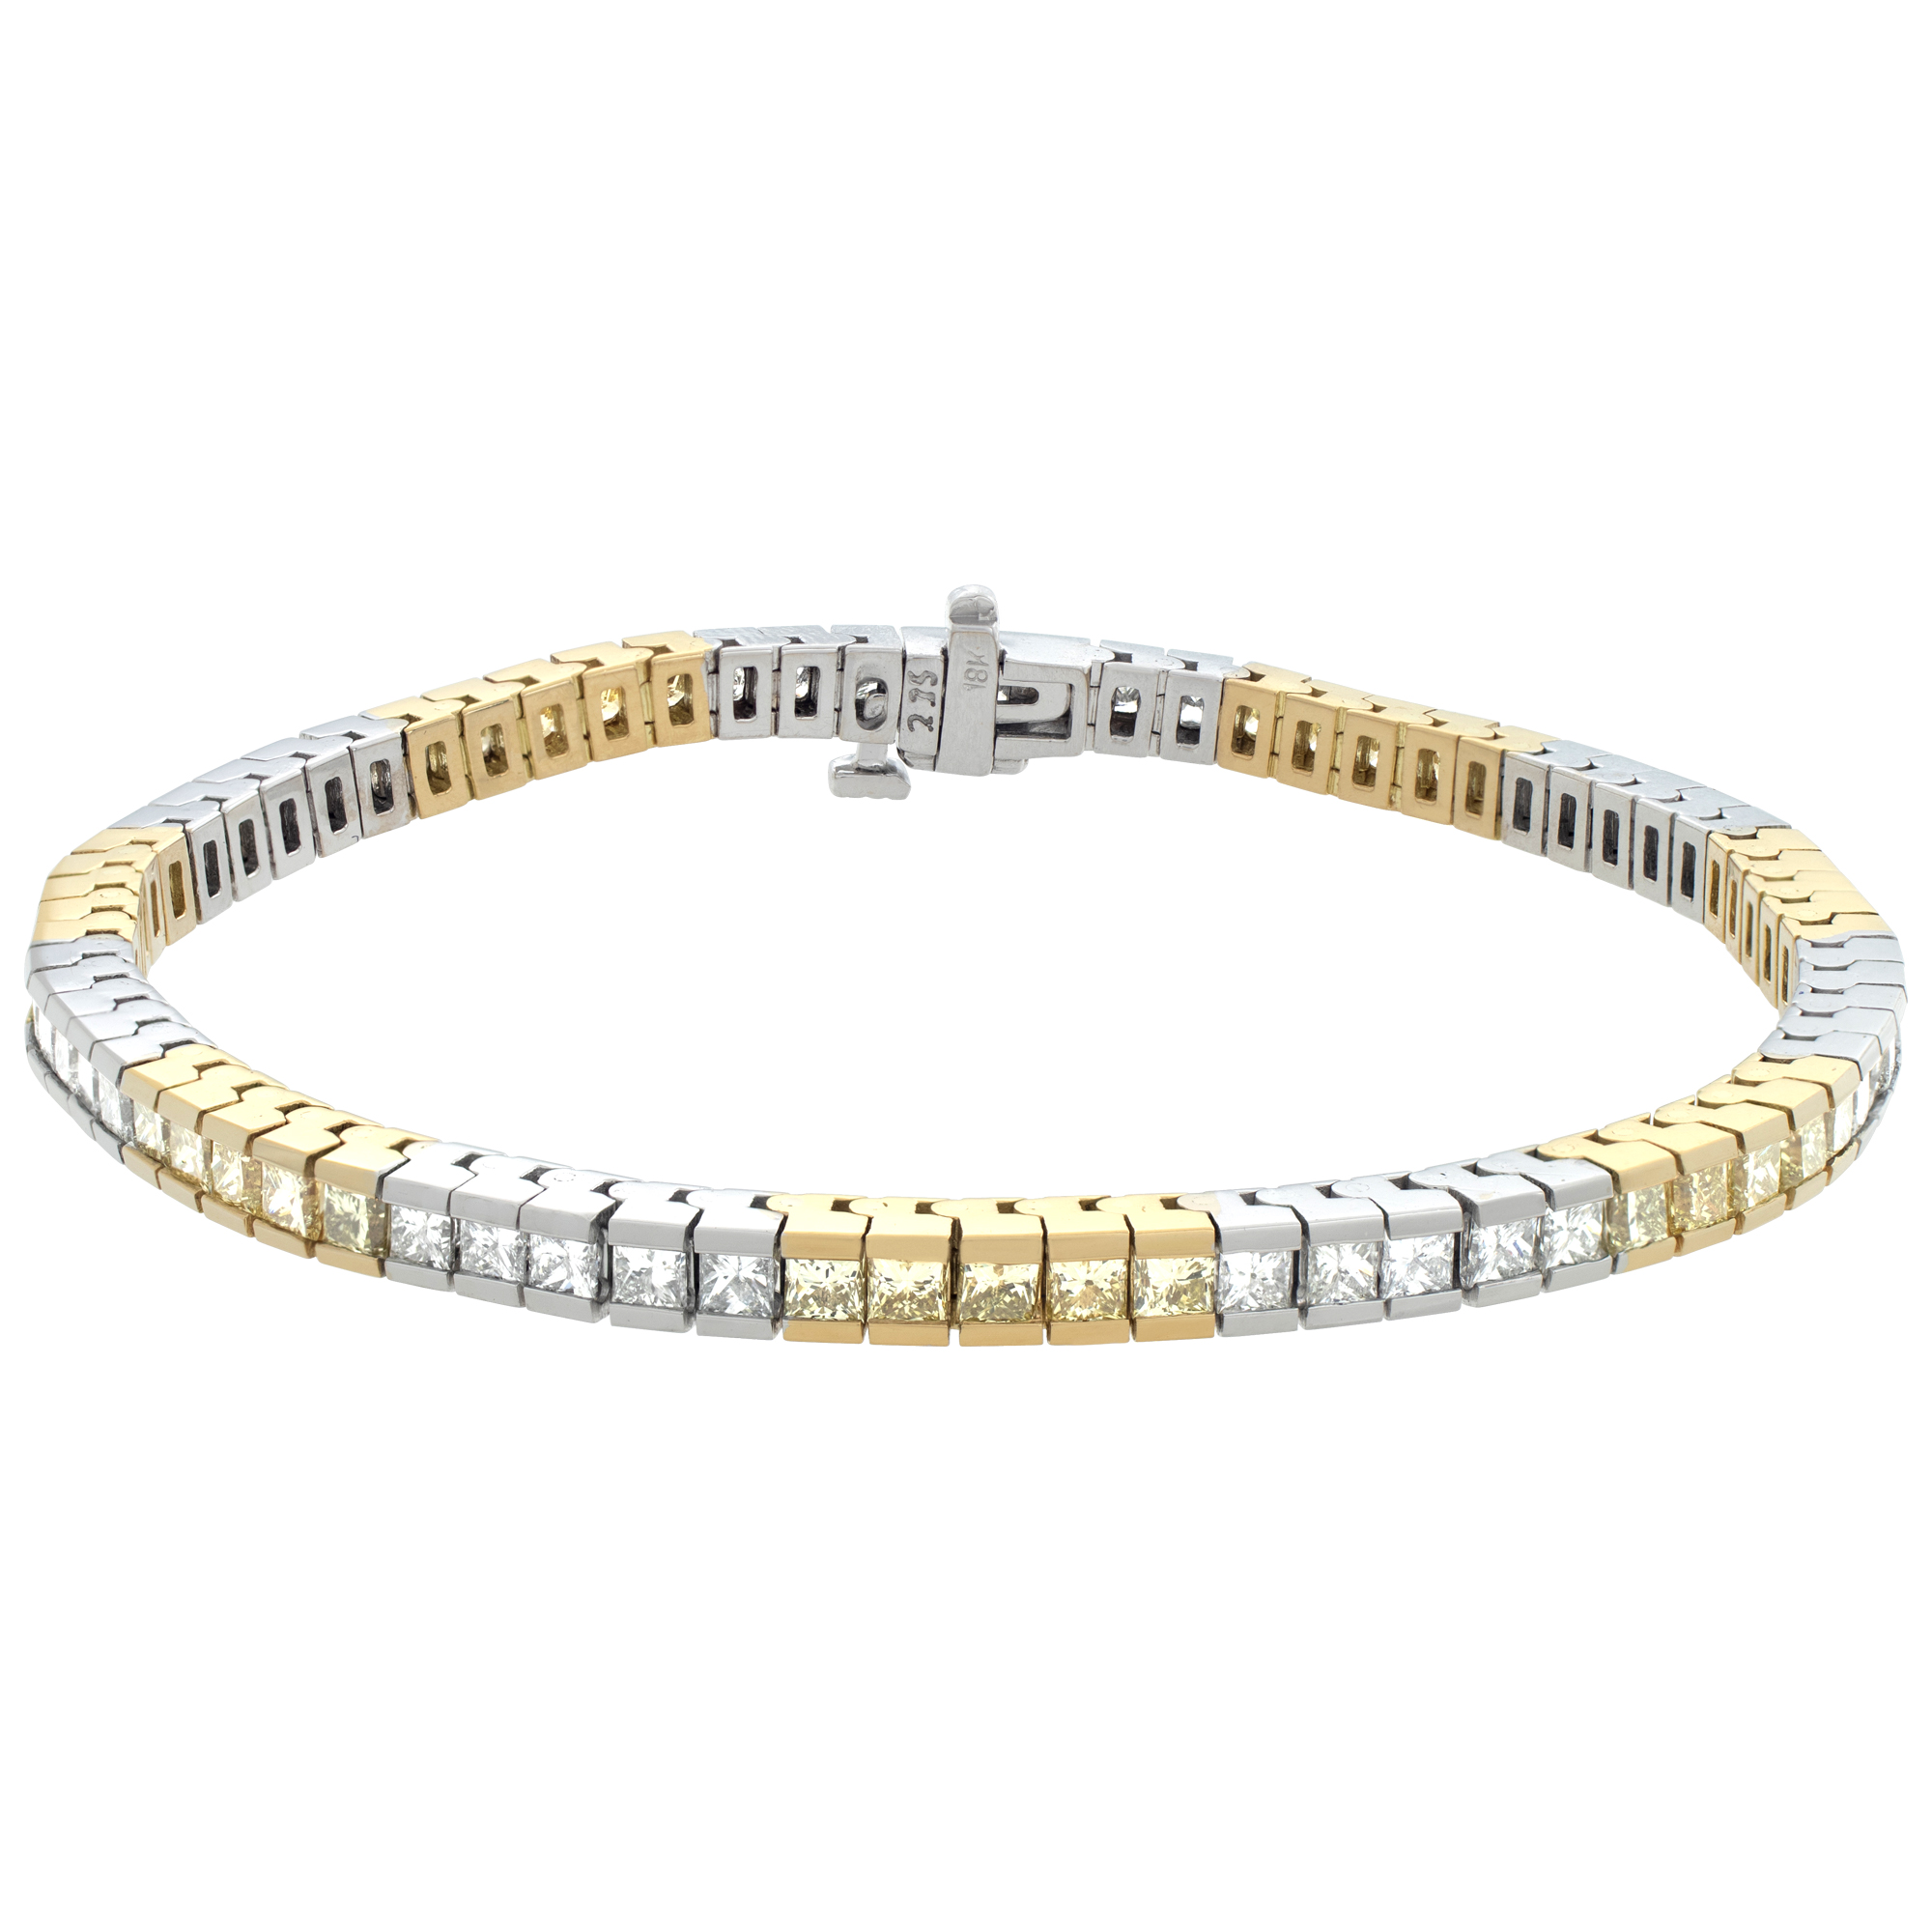 18k white and yellow gold bracelet with white and yellow diamonds. (Stones)